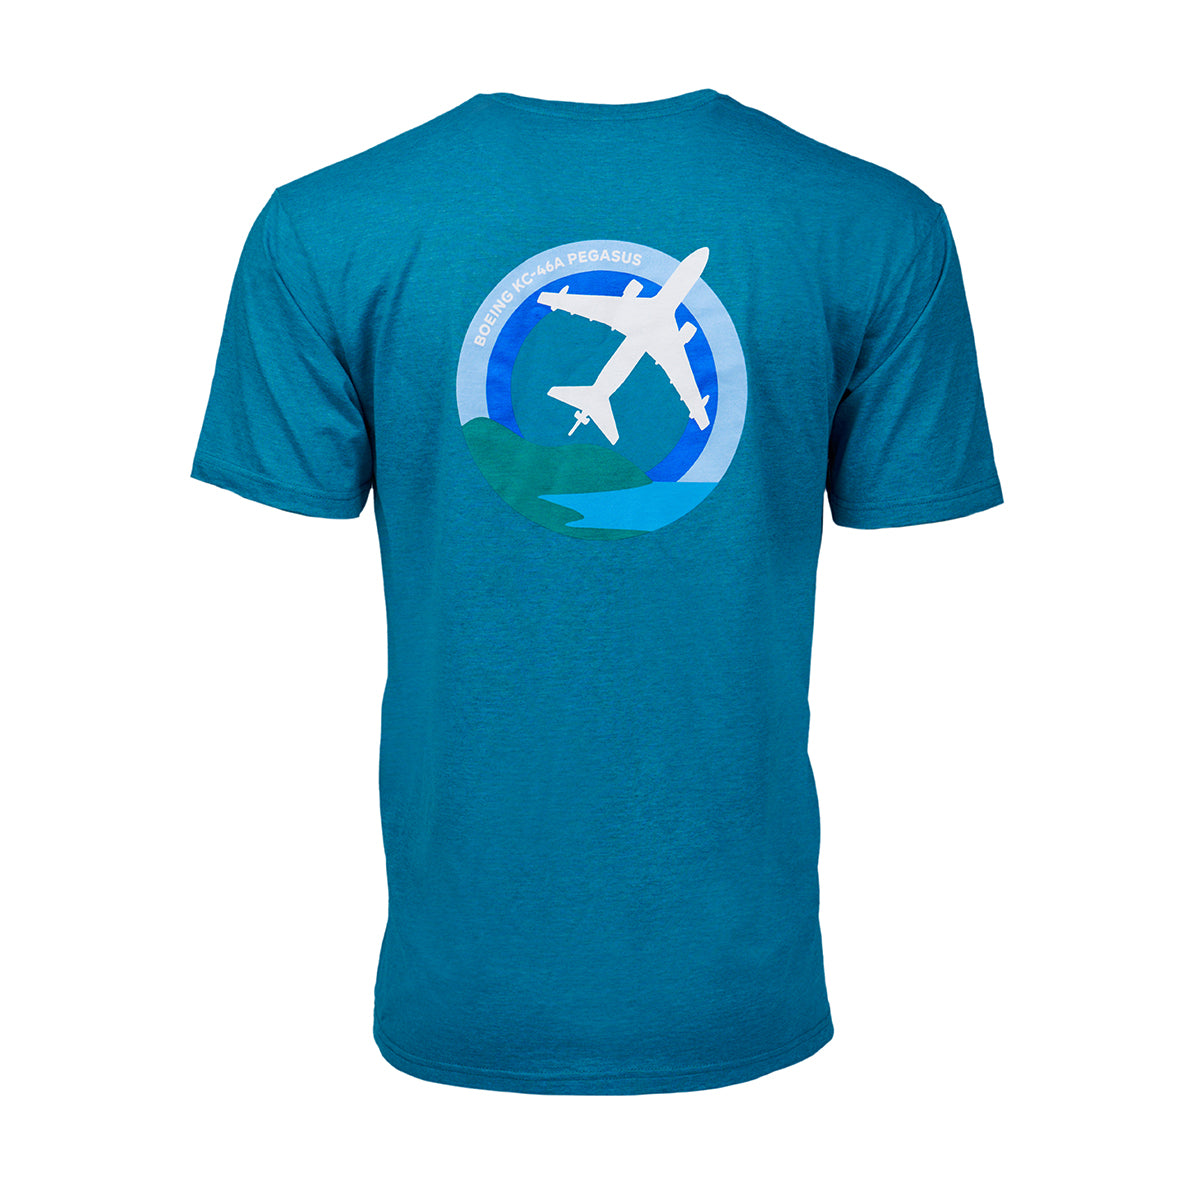 Full product image of the back side of the t-shirt in a light heather blue color.  Showing the Skyward graphic of the Boeing KC-46 Pegasus.